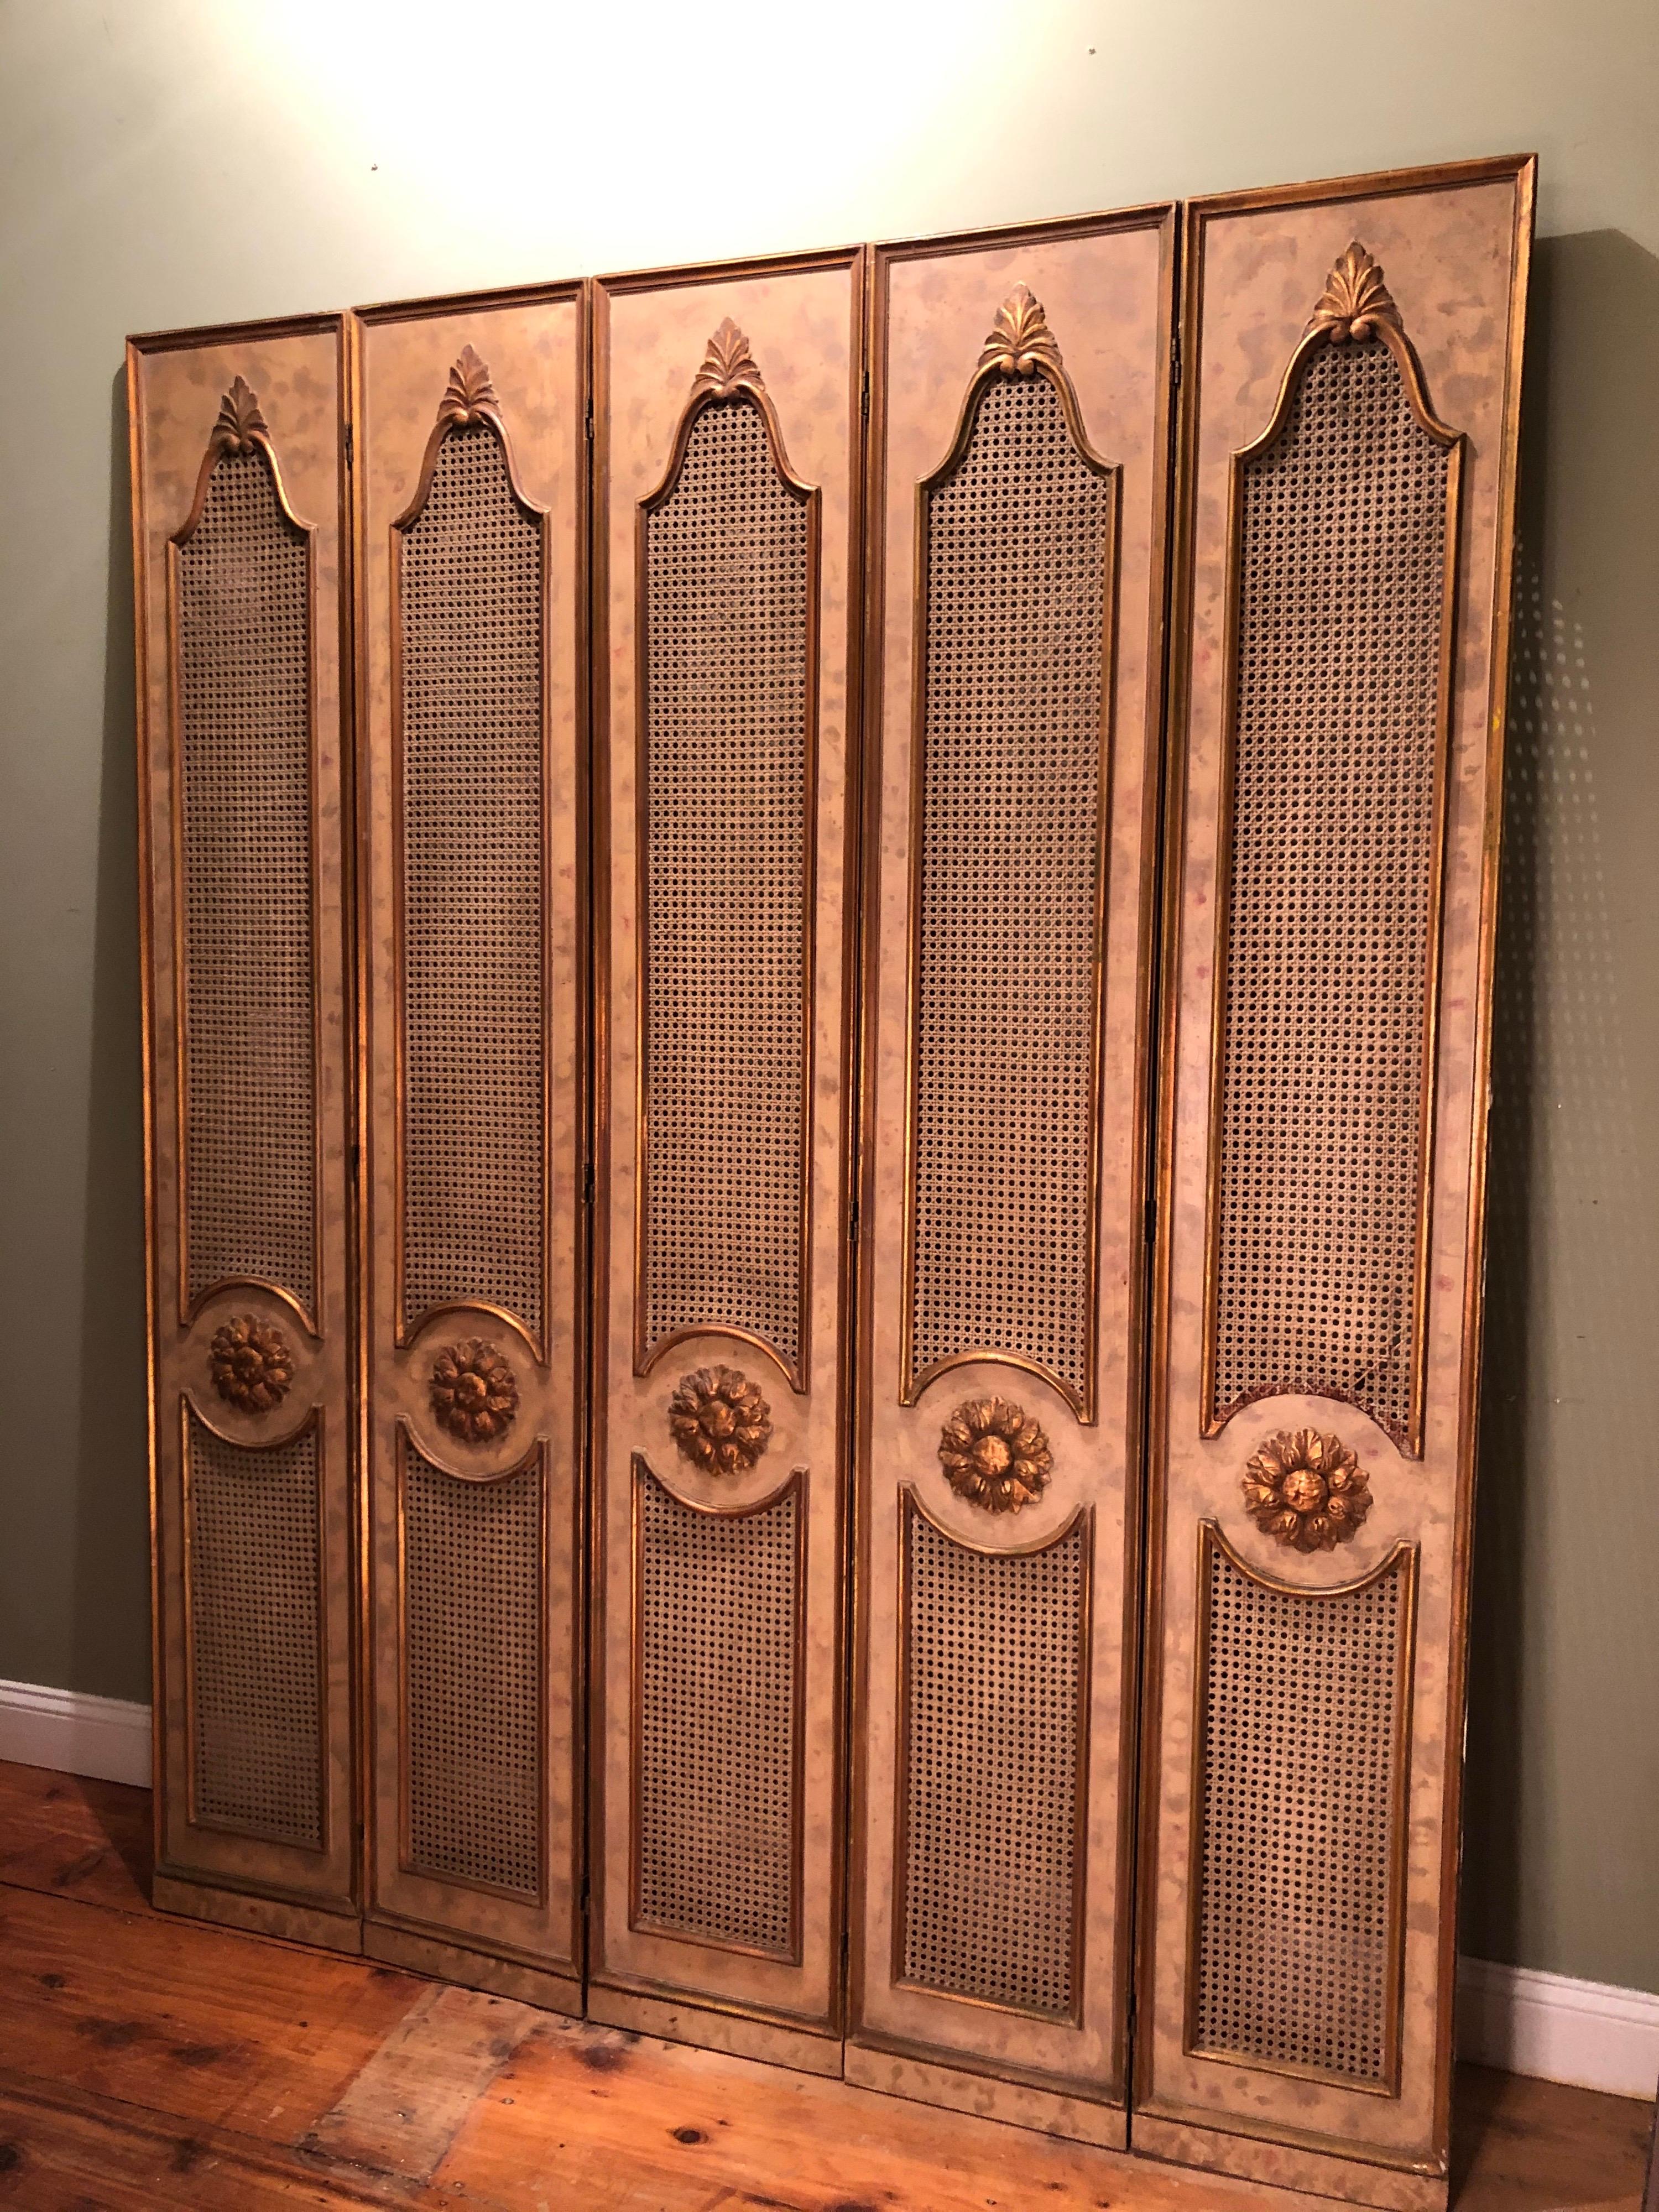 Five-paneled French gilt folding screen. Perfect for privacy or for covering up an area. Gorgeous carved wooden gilt design with caning and hand painted background. Reverse side has a different pattern with some fabric. One outer panel has damage to